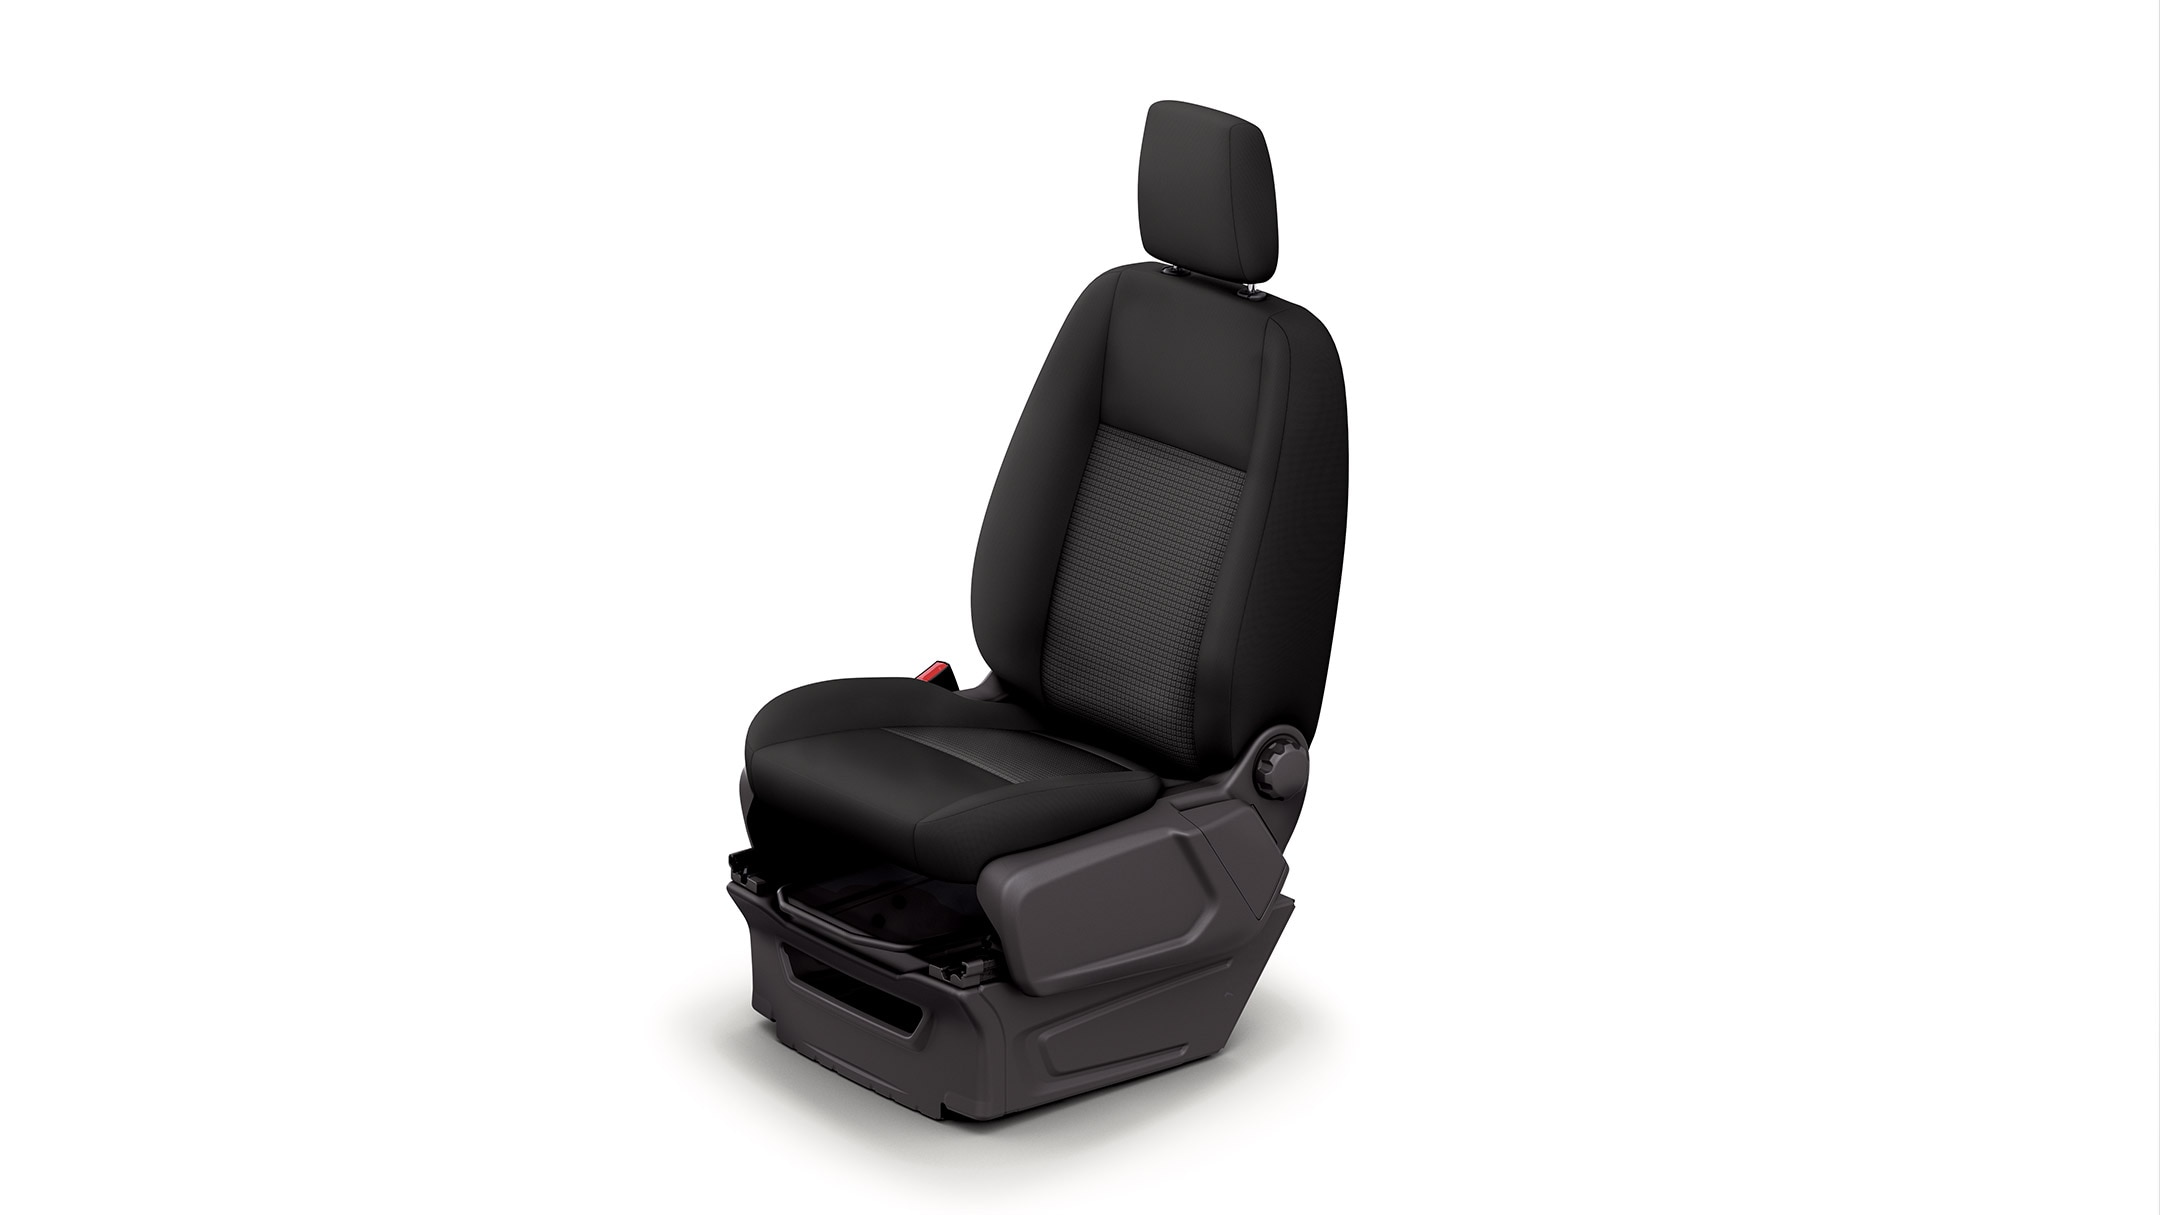 Ford Transit Chassis Cab adjustable driving seat